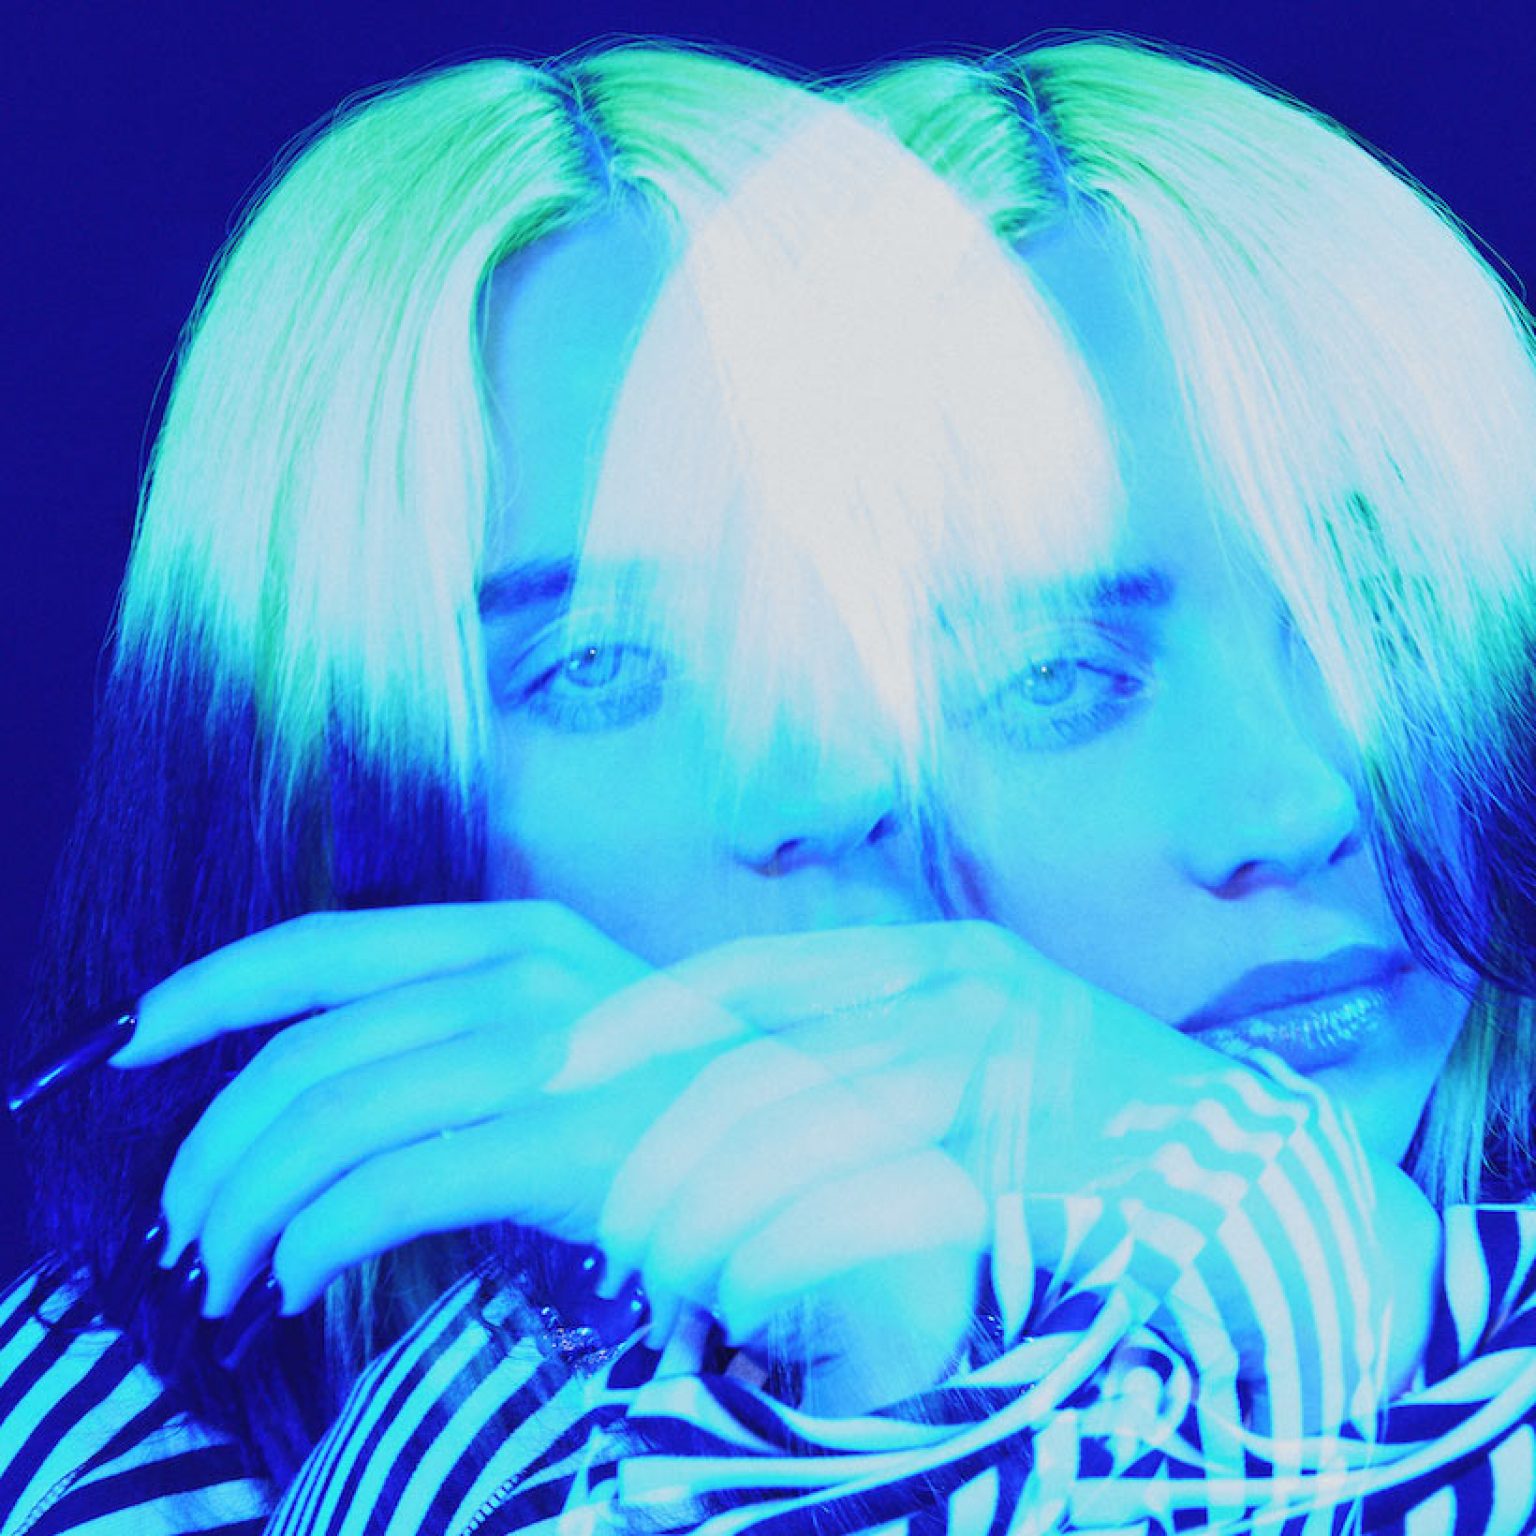 Billie Eilish Returns With Ethereal New Single ‘My Future’ uDiscover